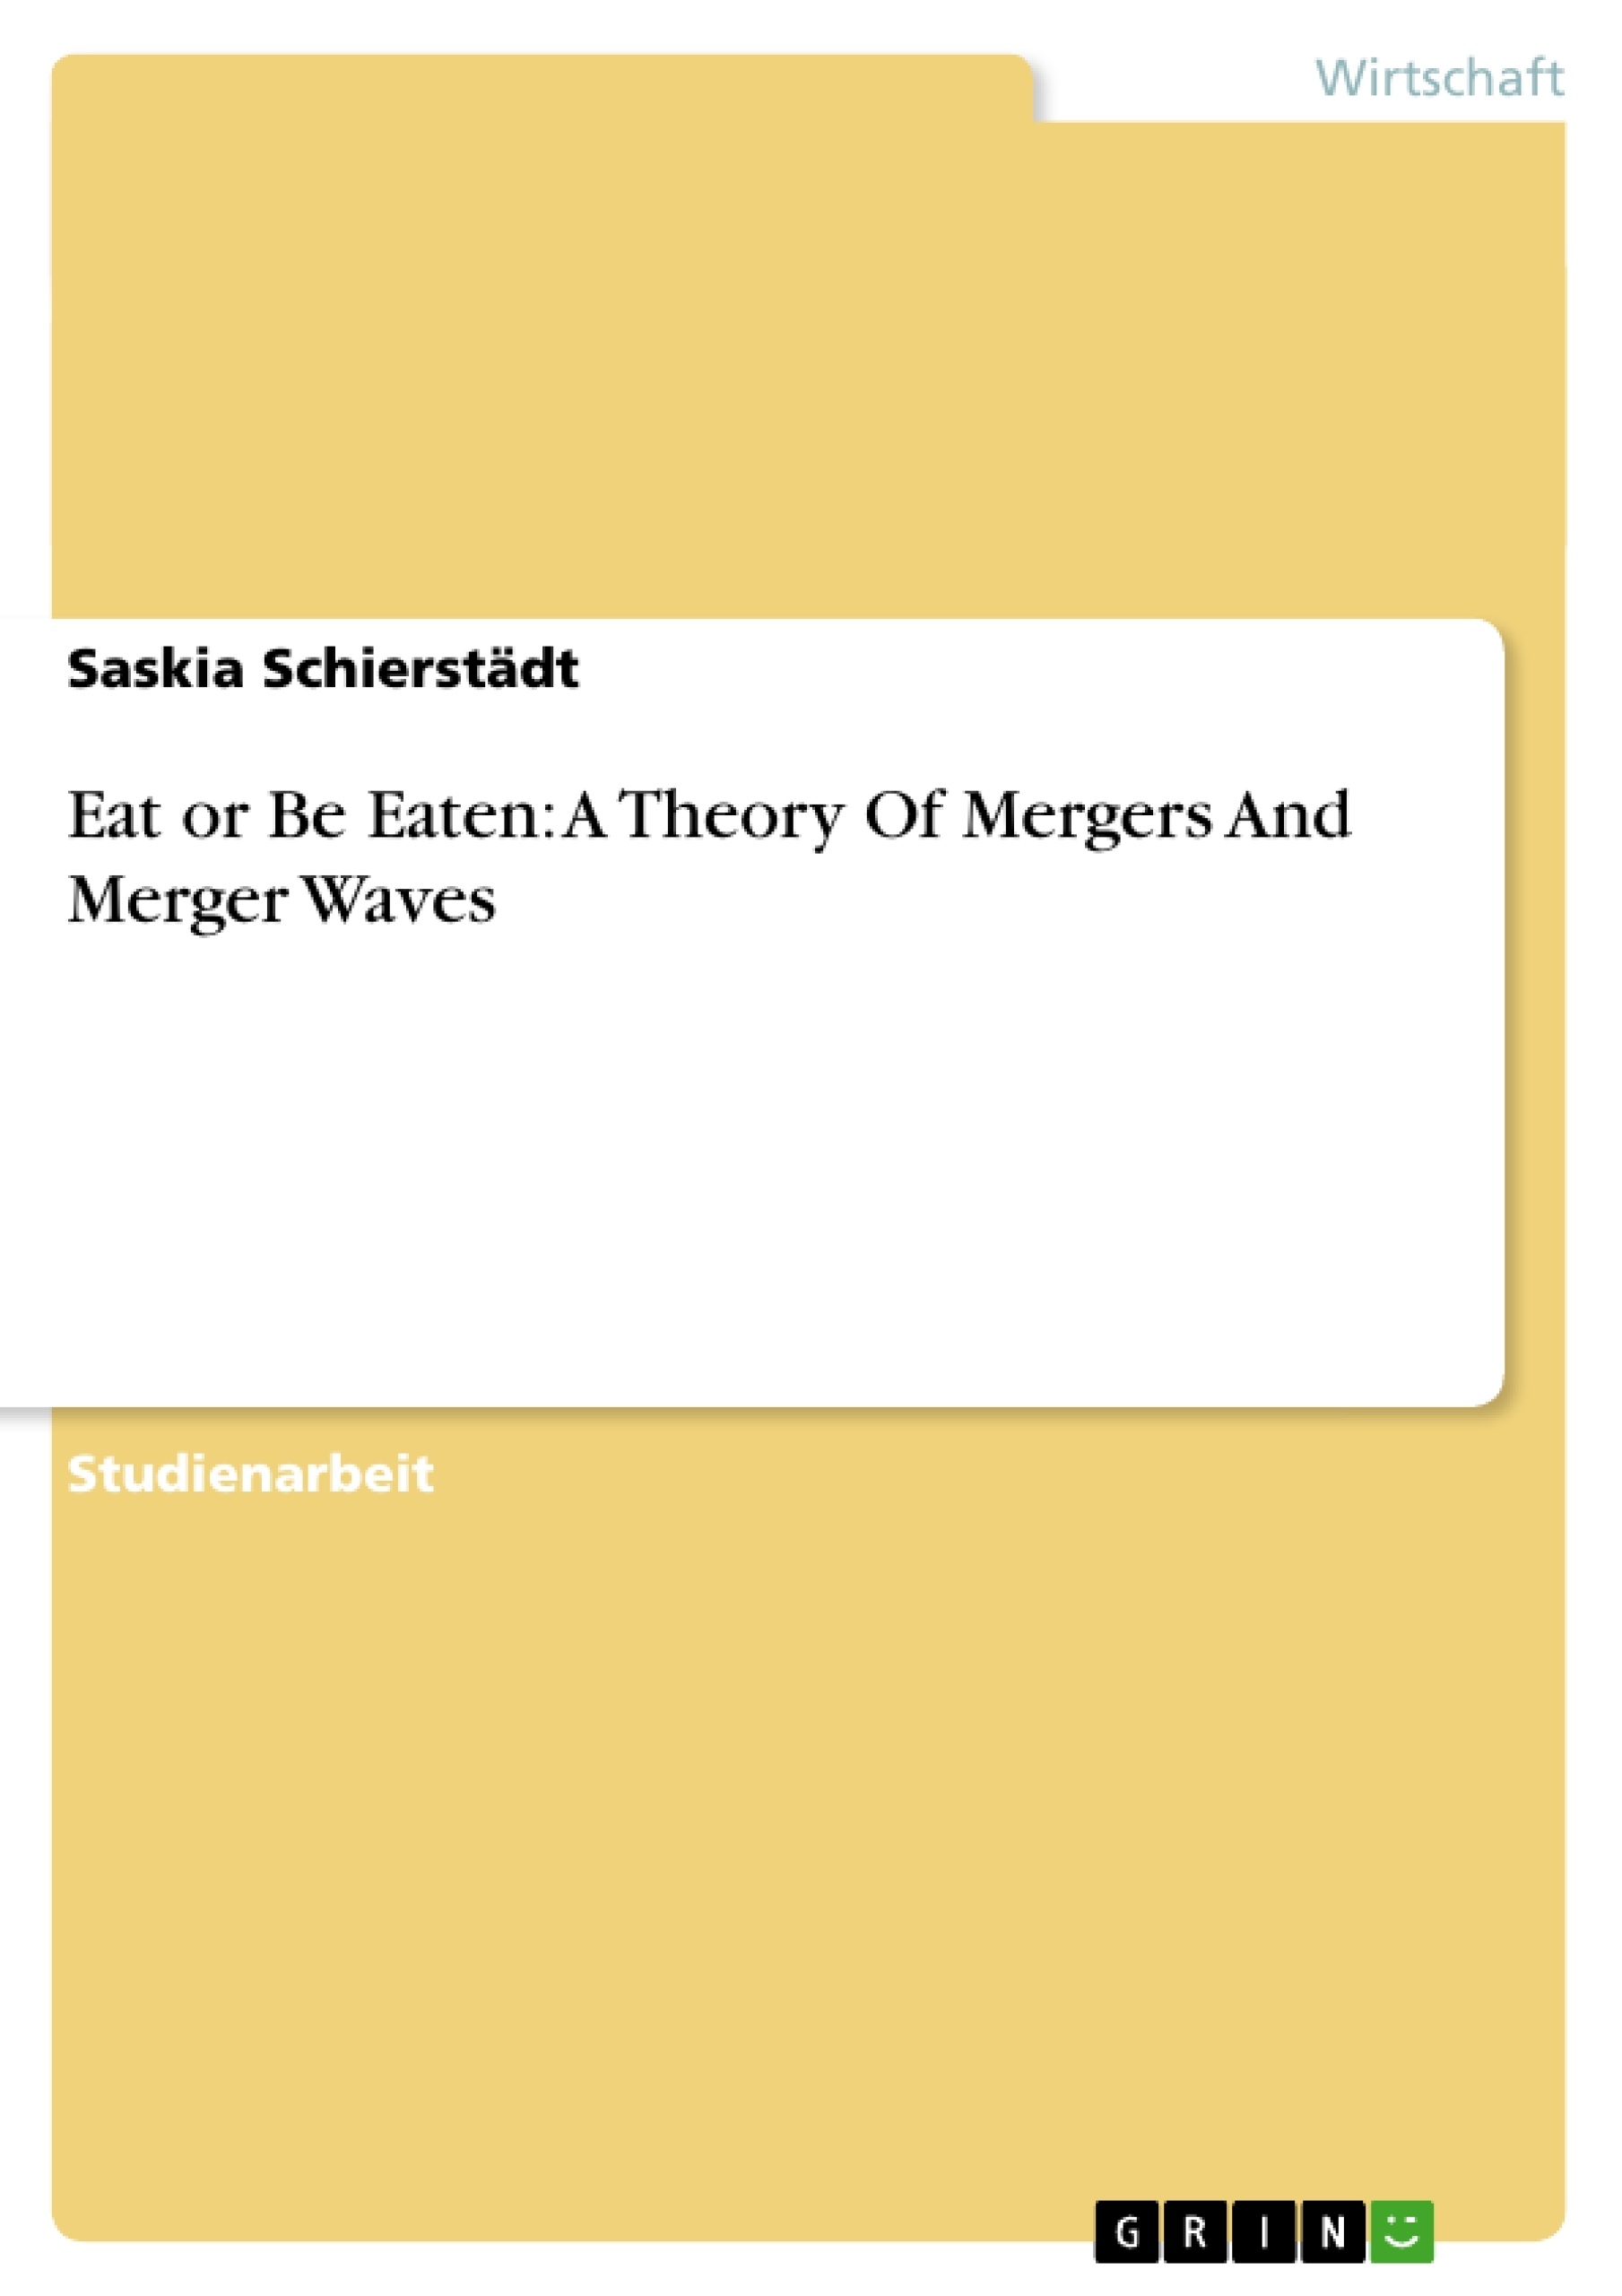 Titel: Eat or Be Eaten: A Theory Of Mergers And Merger Waves